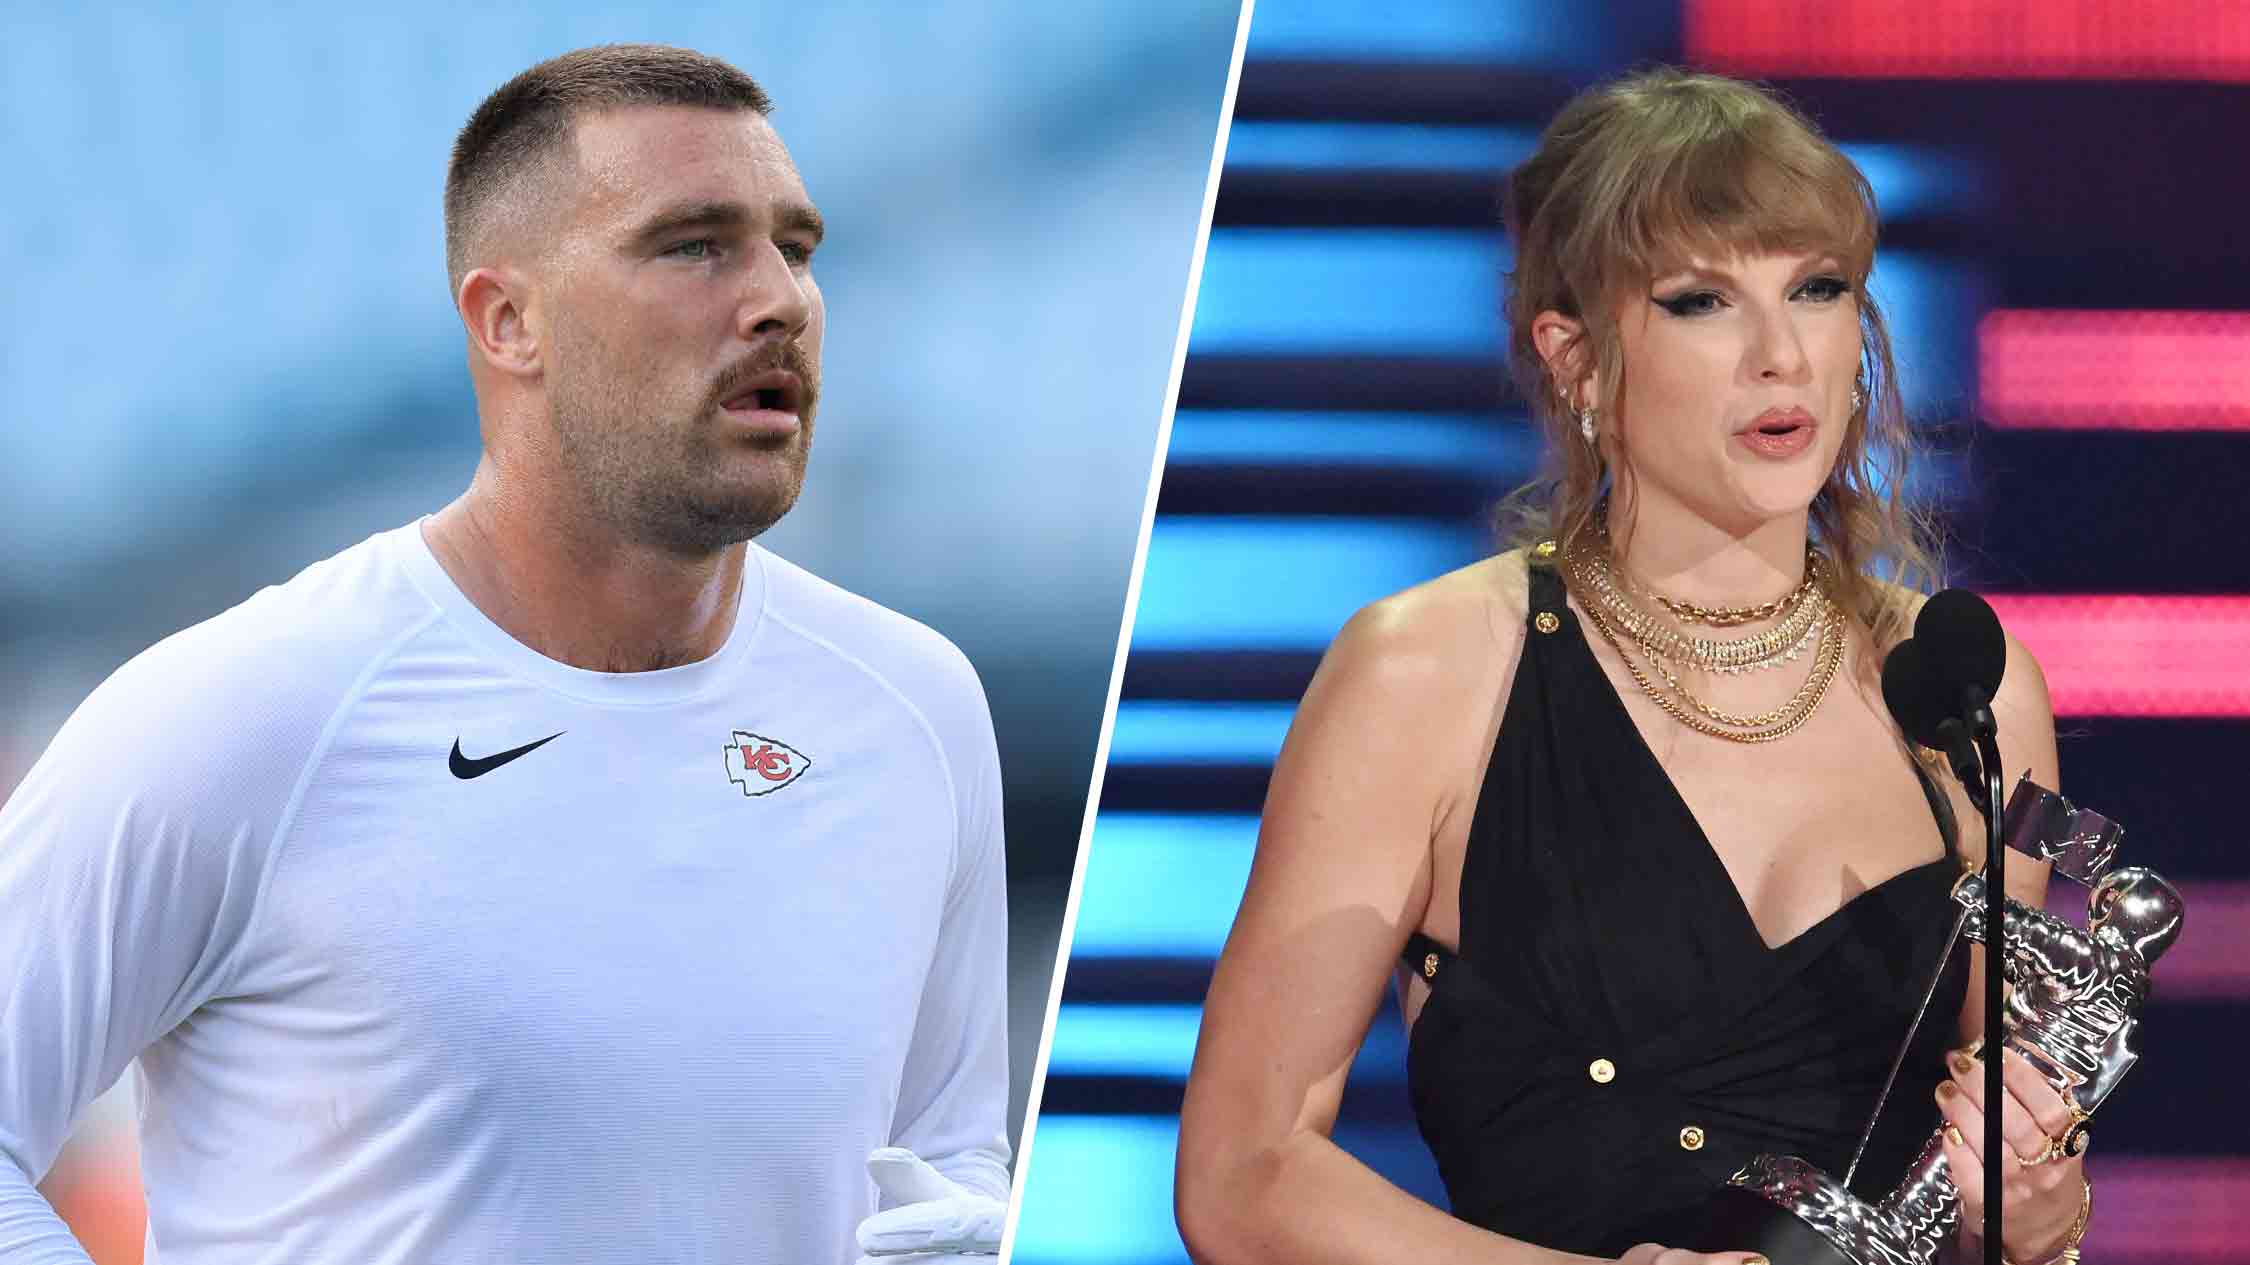 travis kelce: Travis Kelce opens up about dating Taylor Swift and